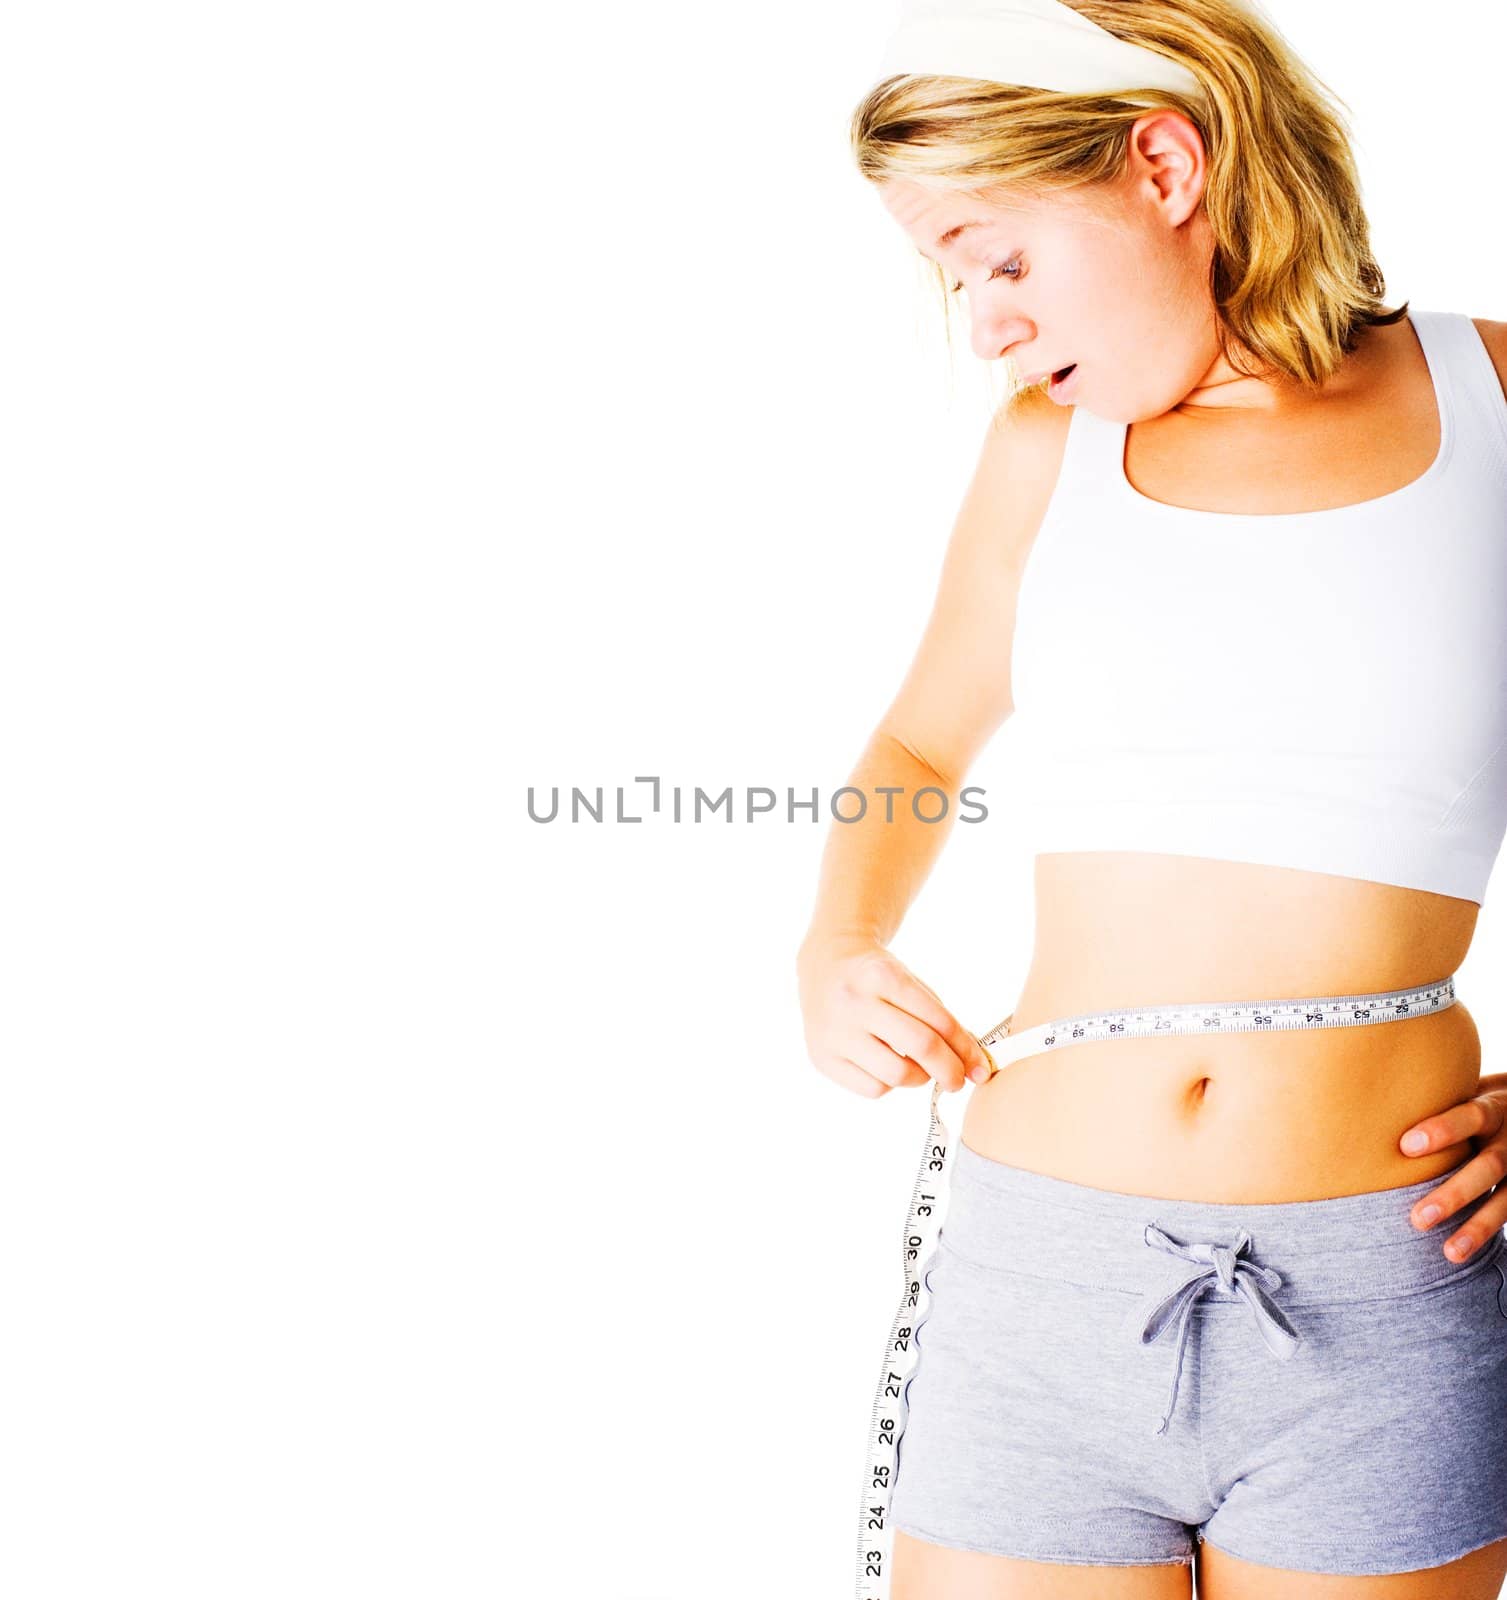 Young woman measuring herself on white, from a complete series of photos.